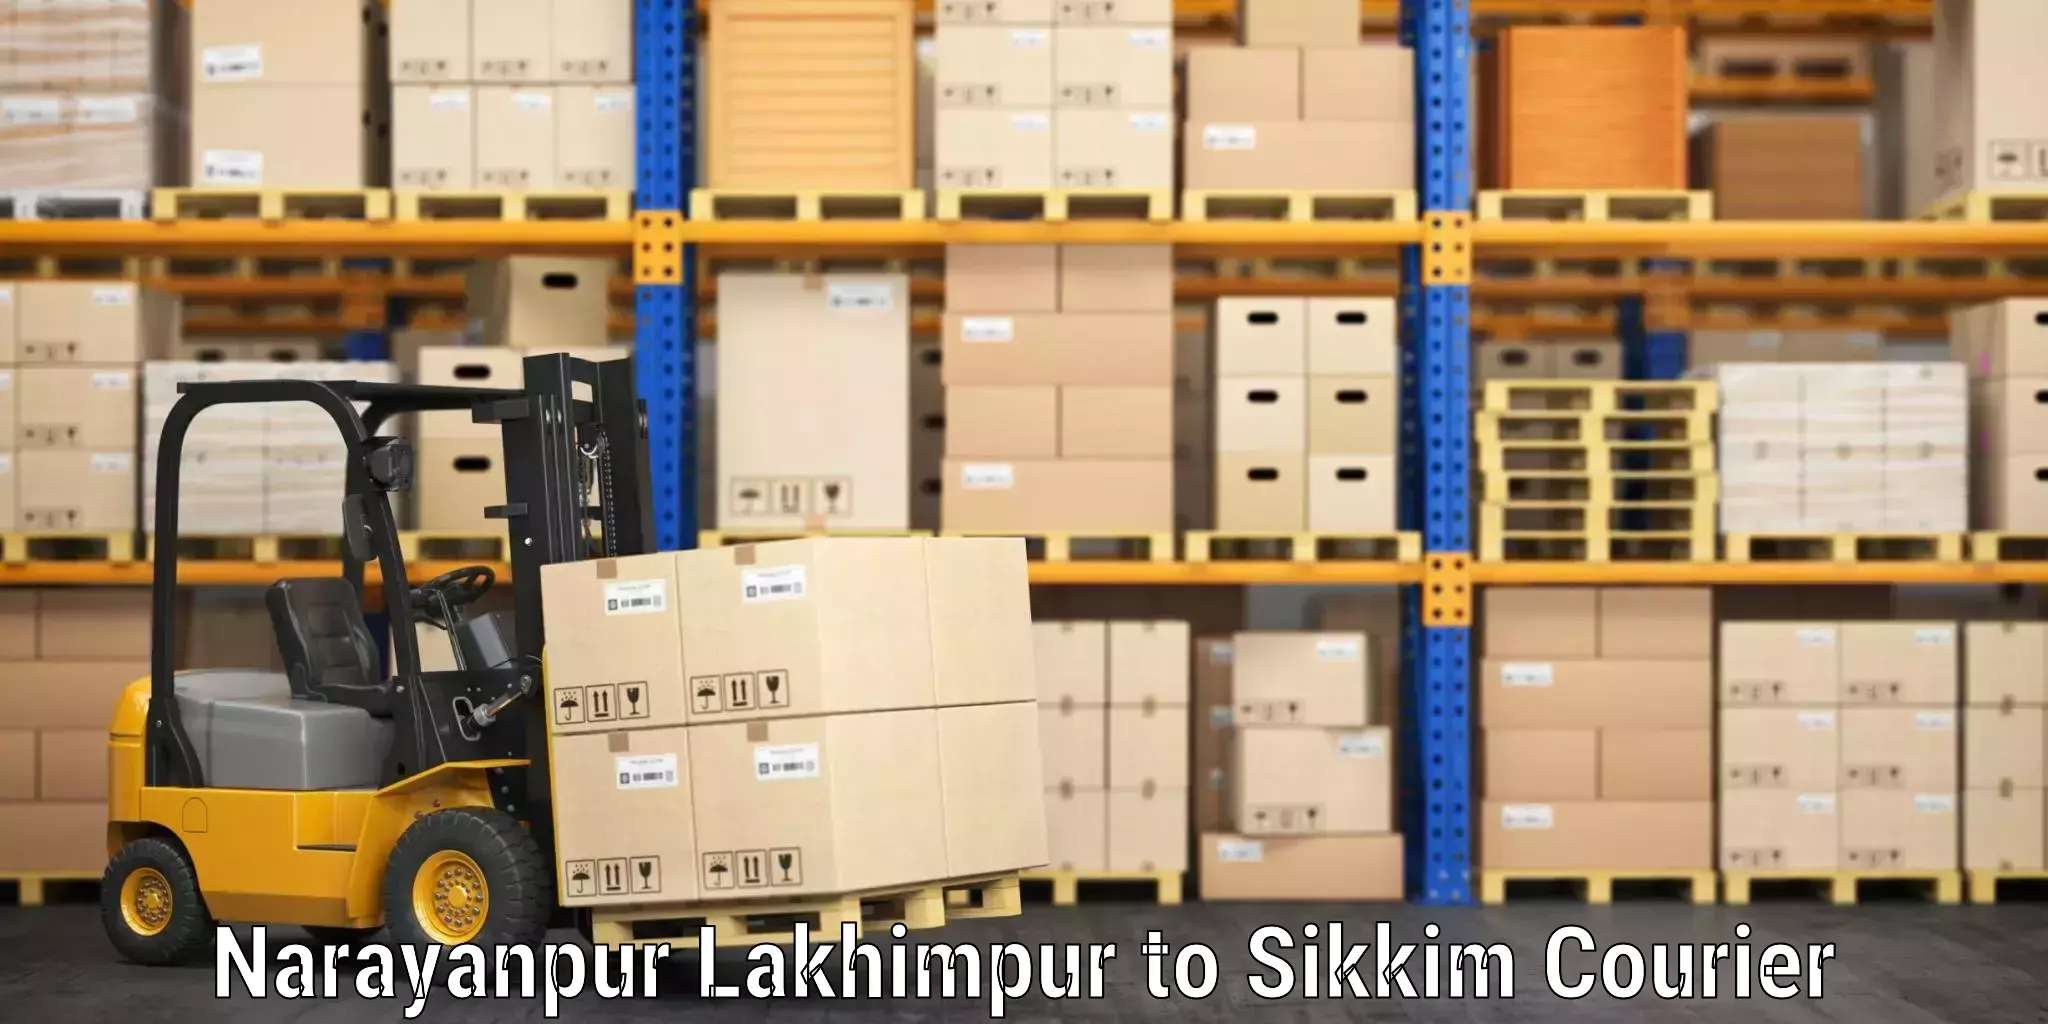 Baggage delivery technology Narayanpur Lakhimpur to Sikkim